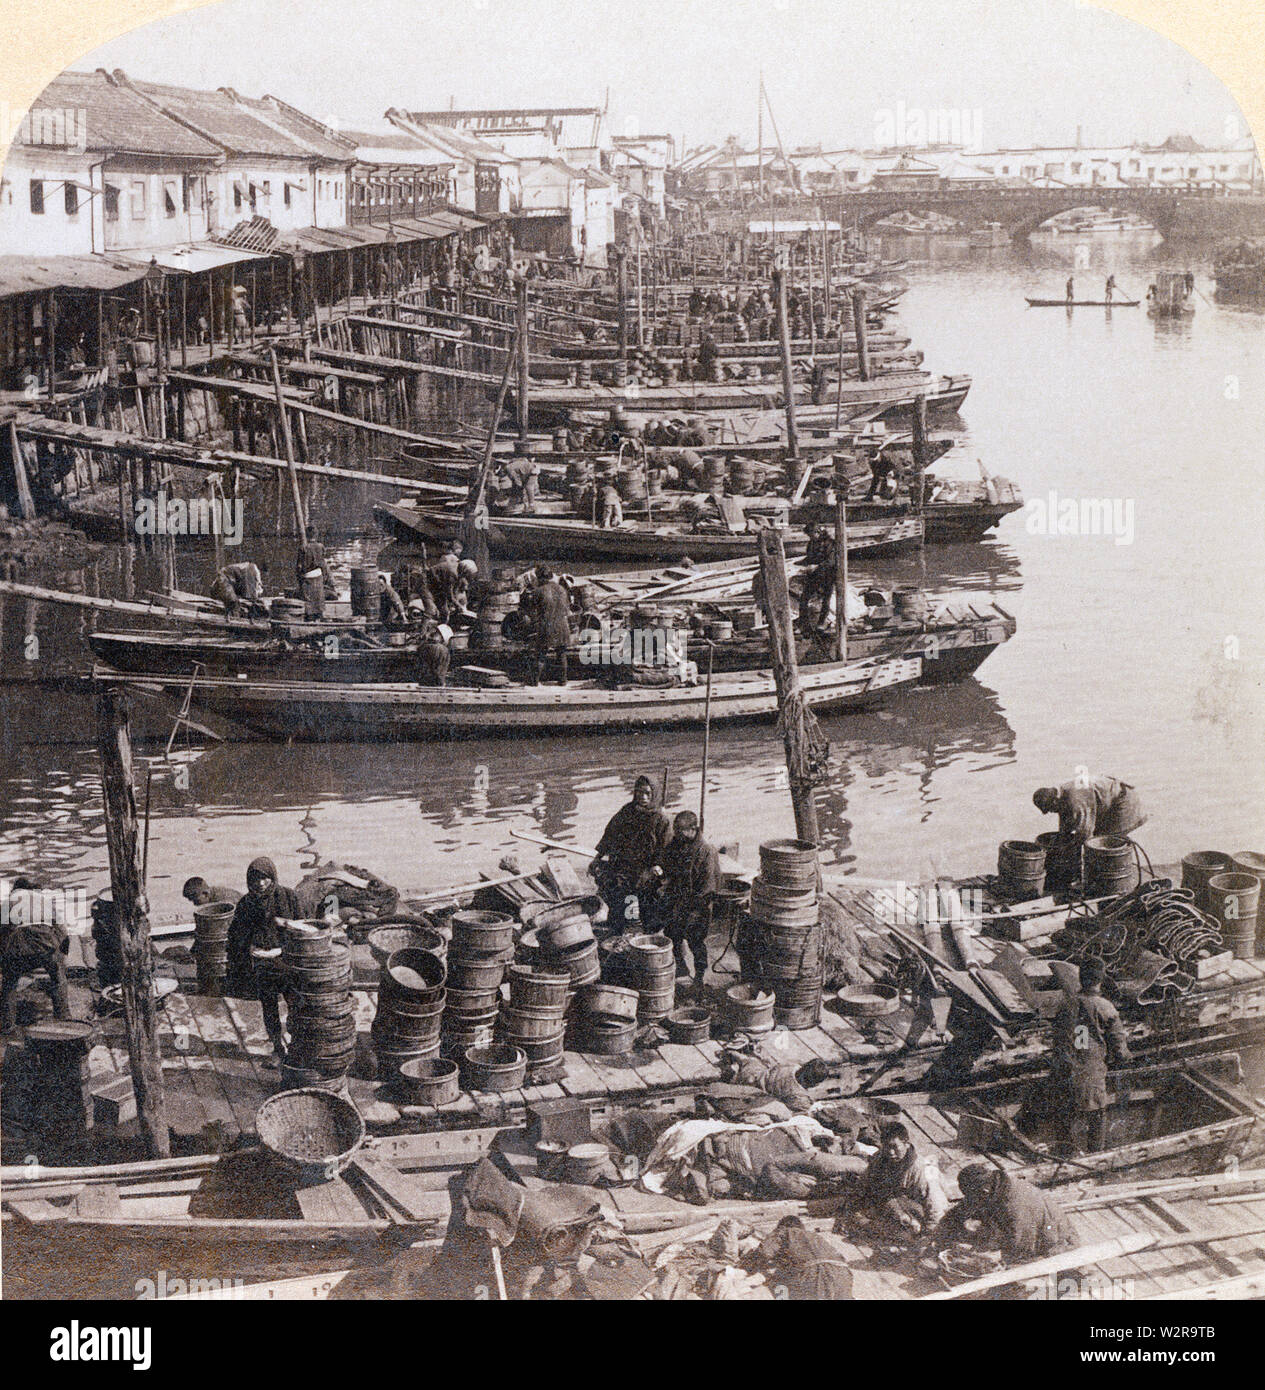 [ 1890s Japan - Tokyo Fish Market at Nihonbashi ] —   Boats are docked at the Nihonbashi fish market in Tokyo.  The market was destroyed by the Great Kanto Earthquake (Kanto Daishinsai) of September 1, 1923 (Taisho 12). It re-opened in Tsukiji in 1935 (Showa 10), where it remained until October 6, 2018 (Heisei 30).  19th century vintage stereoview. Stock Photo